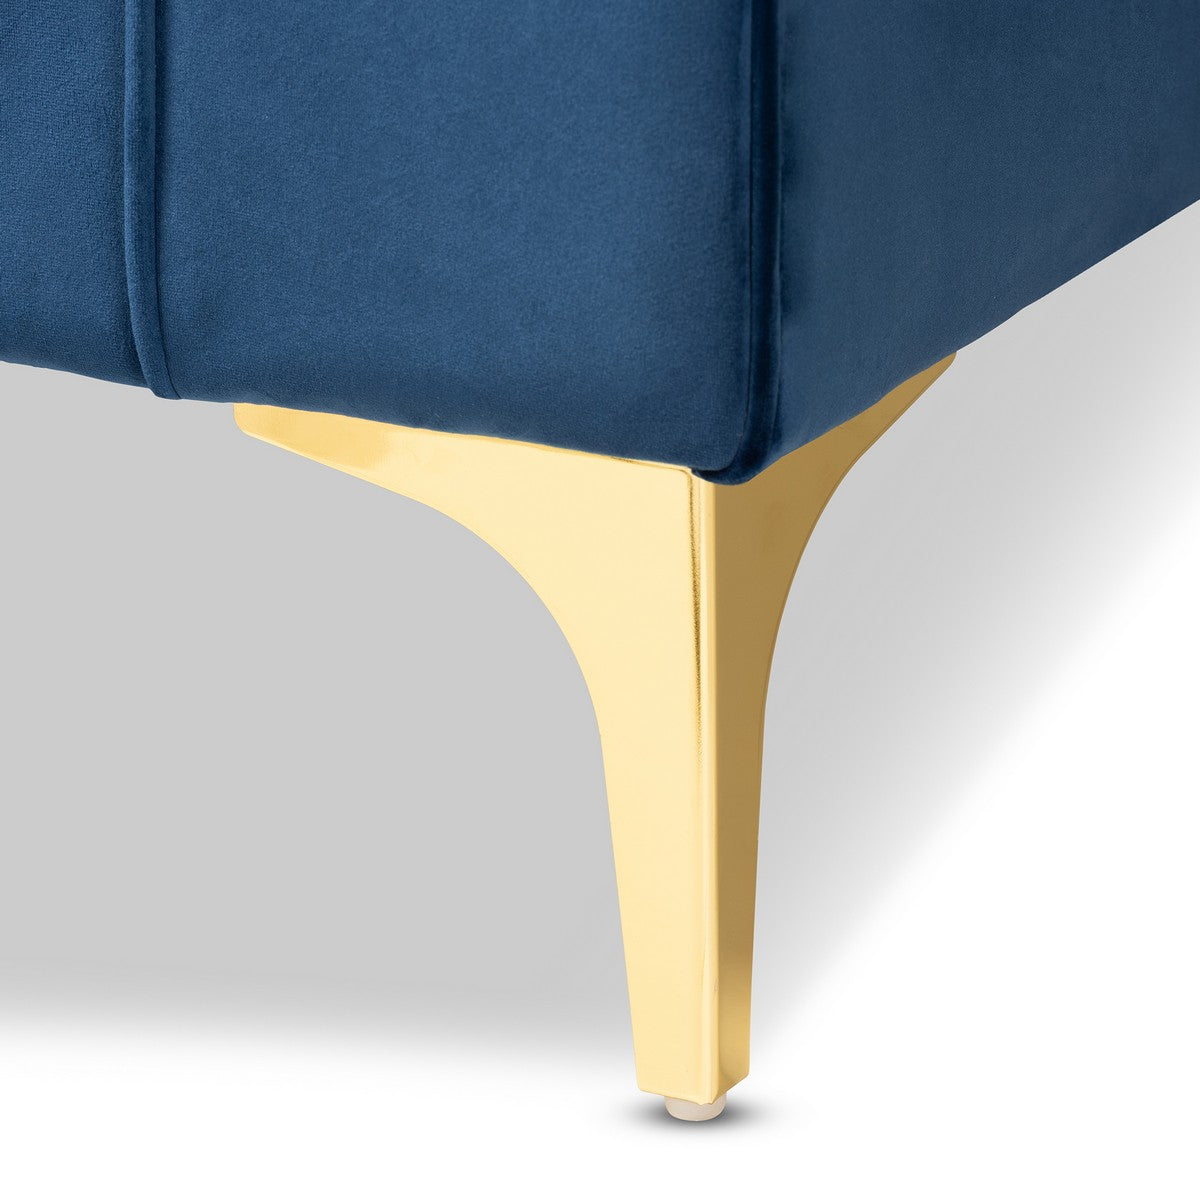 Baxton Studio Giselle Glam and Luxe Navy Blue Velvet Fabric Upholstered Mirrored Gold Finished Left Facing Sectional Sofa with Chaise